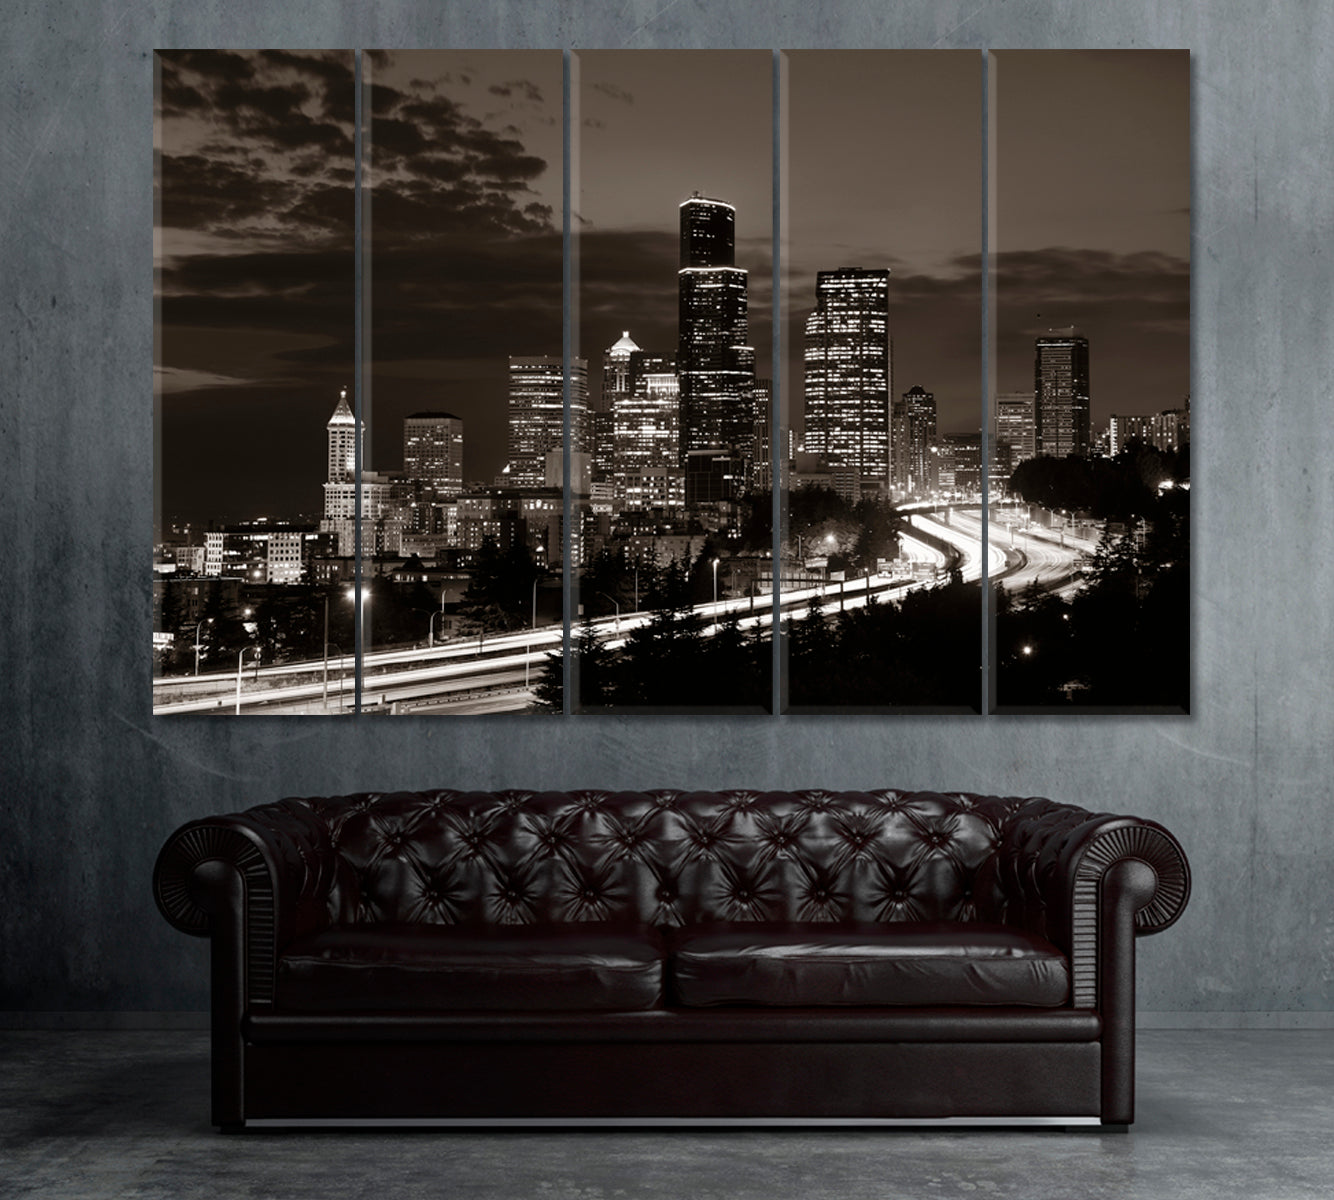 Seattle City at Dusk Canvas Print ArtLexy 5 Panels 36"x24" inches 